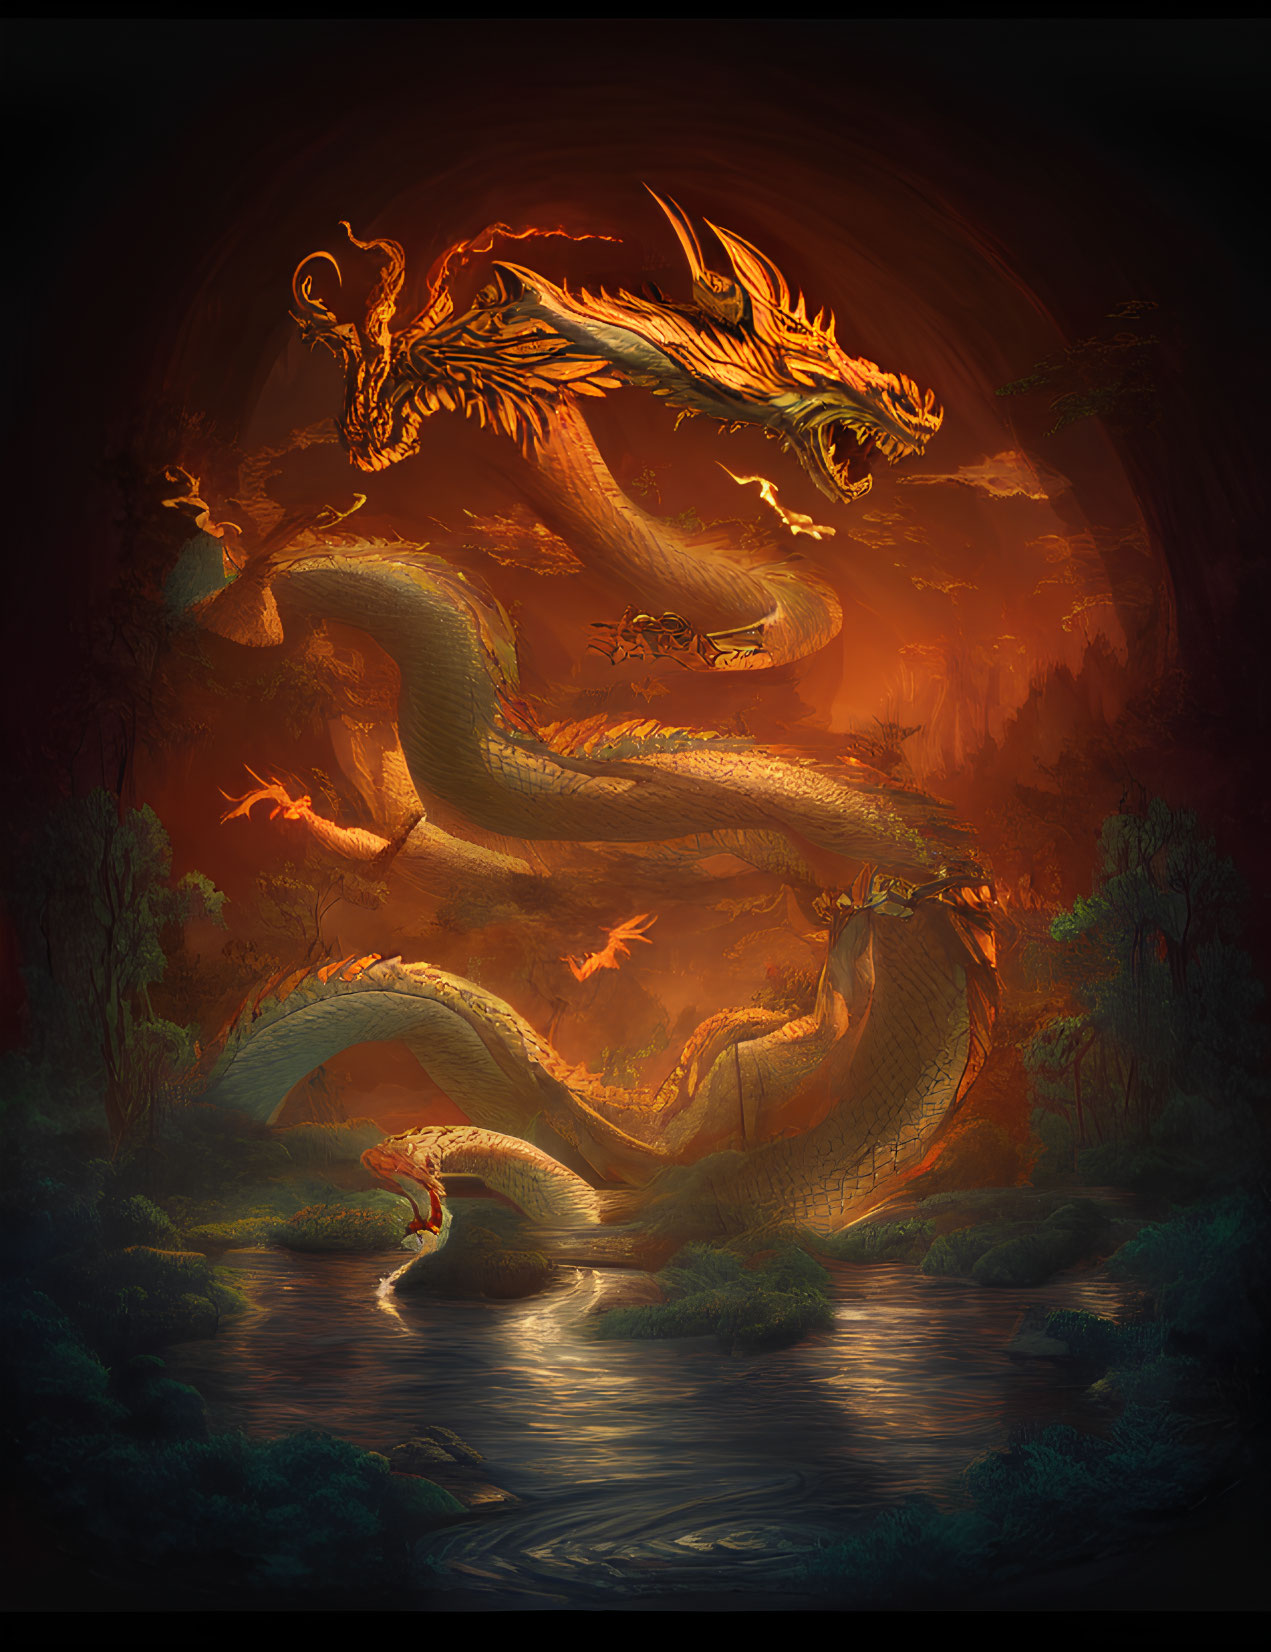 Golden dragon with horned head flying over fiery forest with smaller dragons and stream